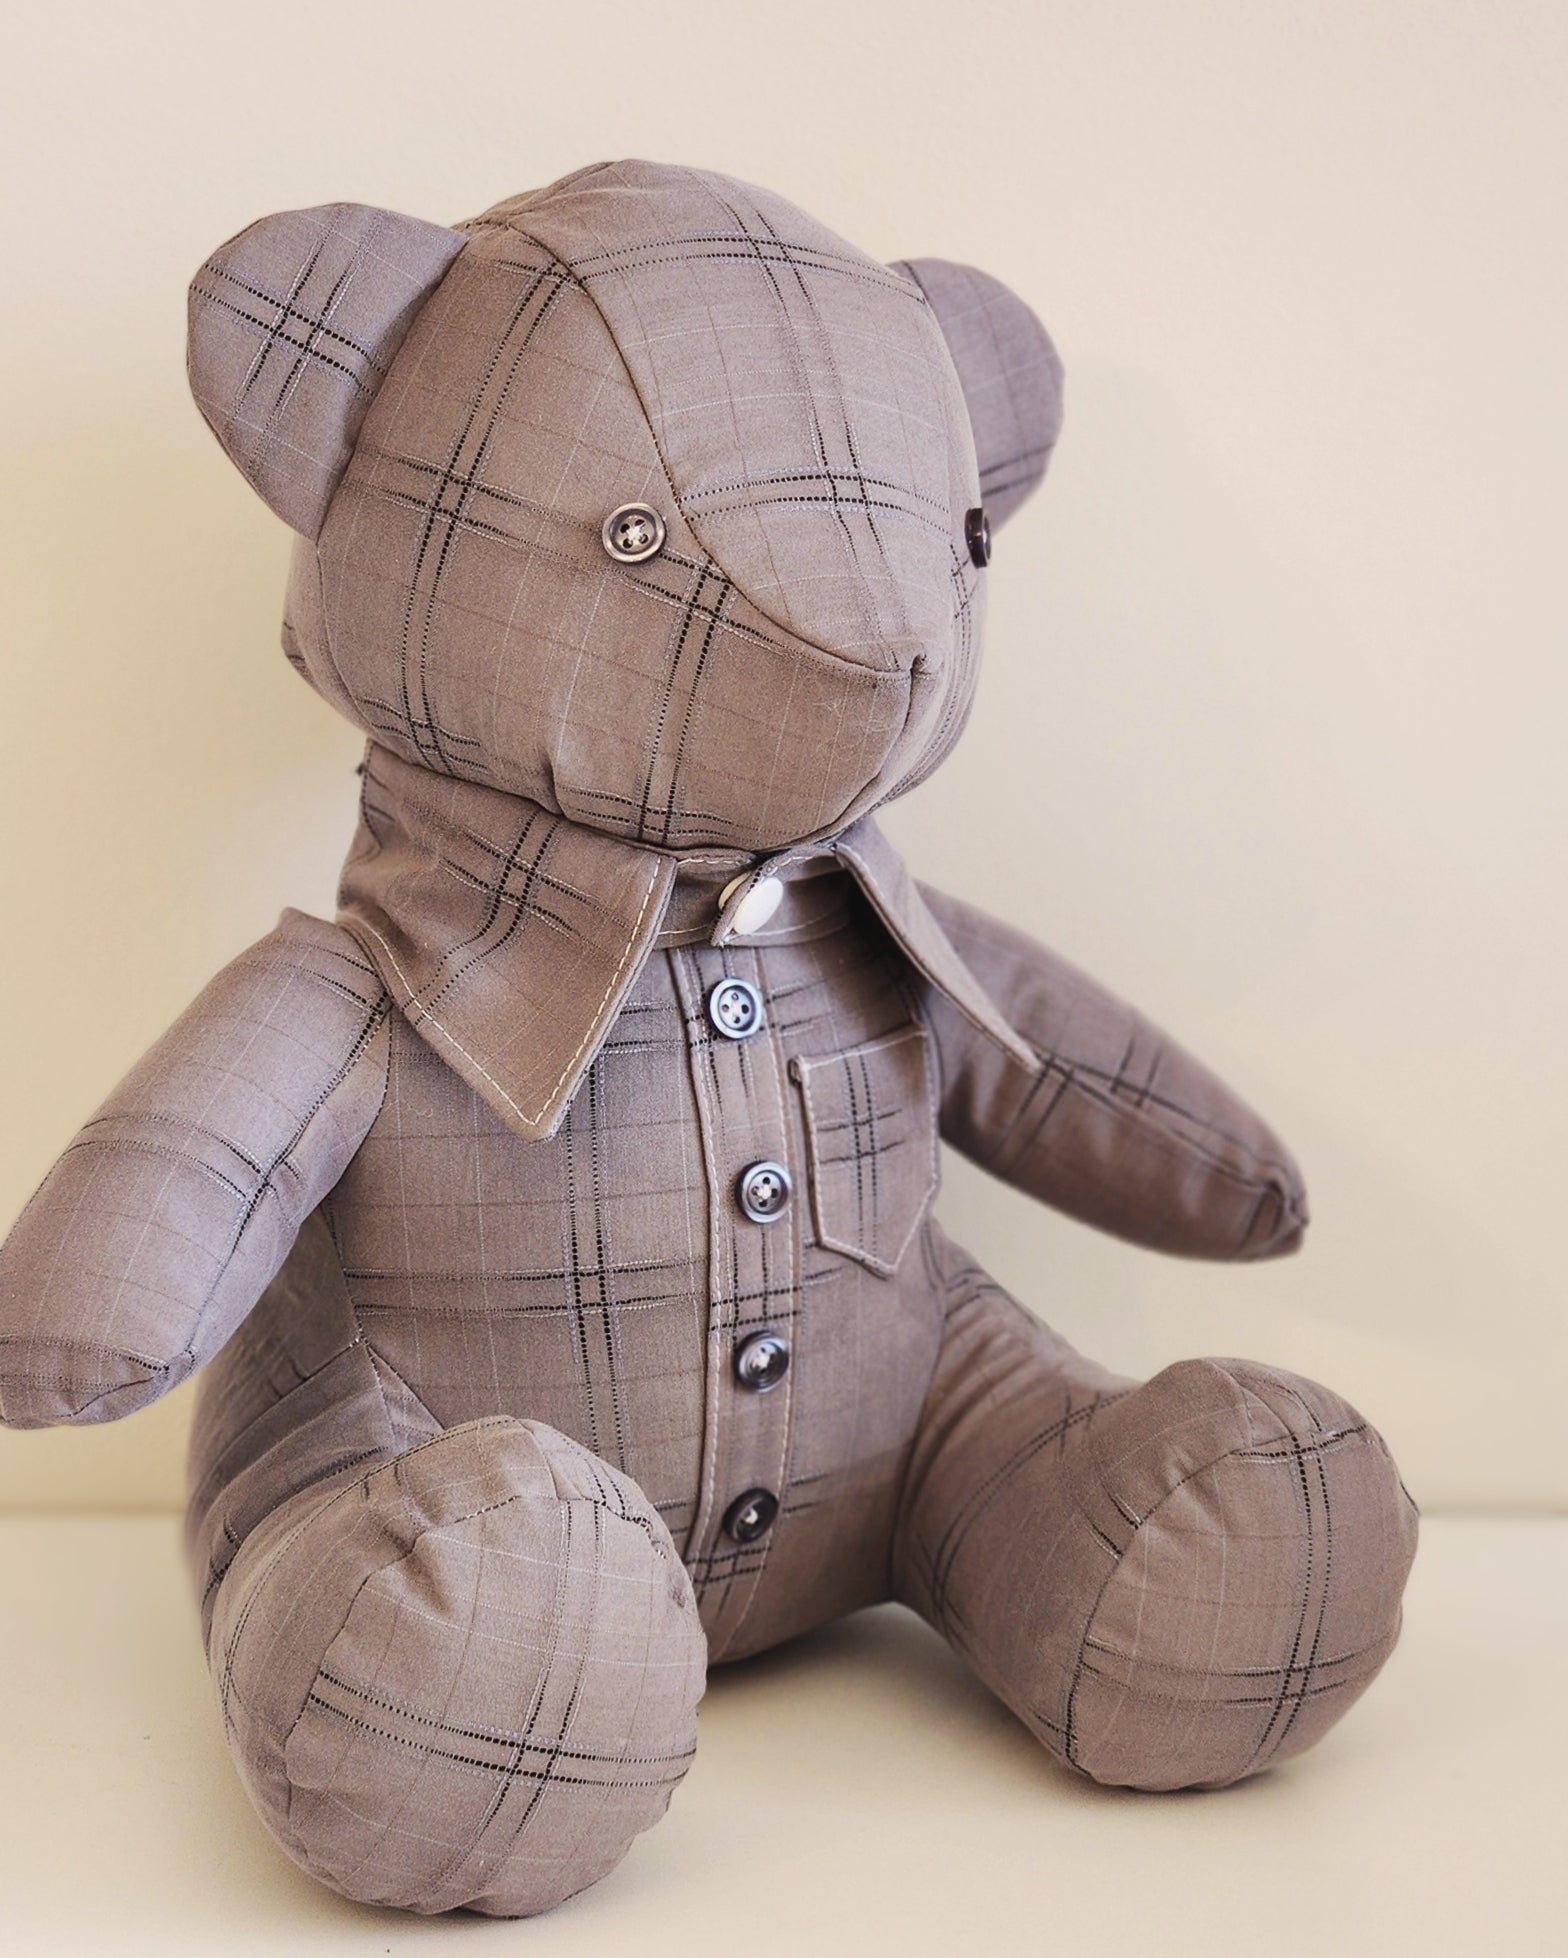 Large memory bear with collar and buttons